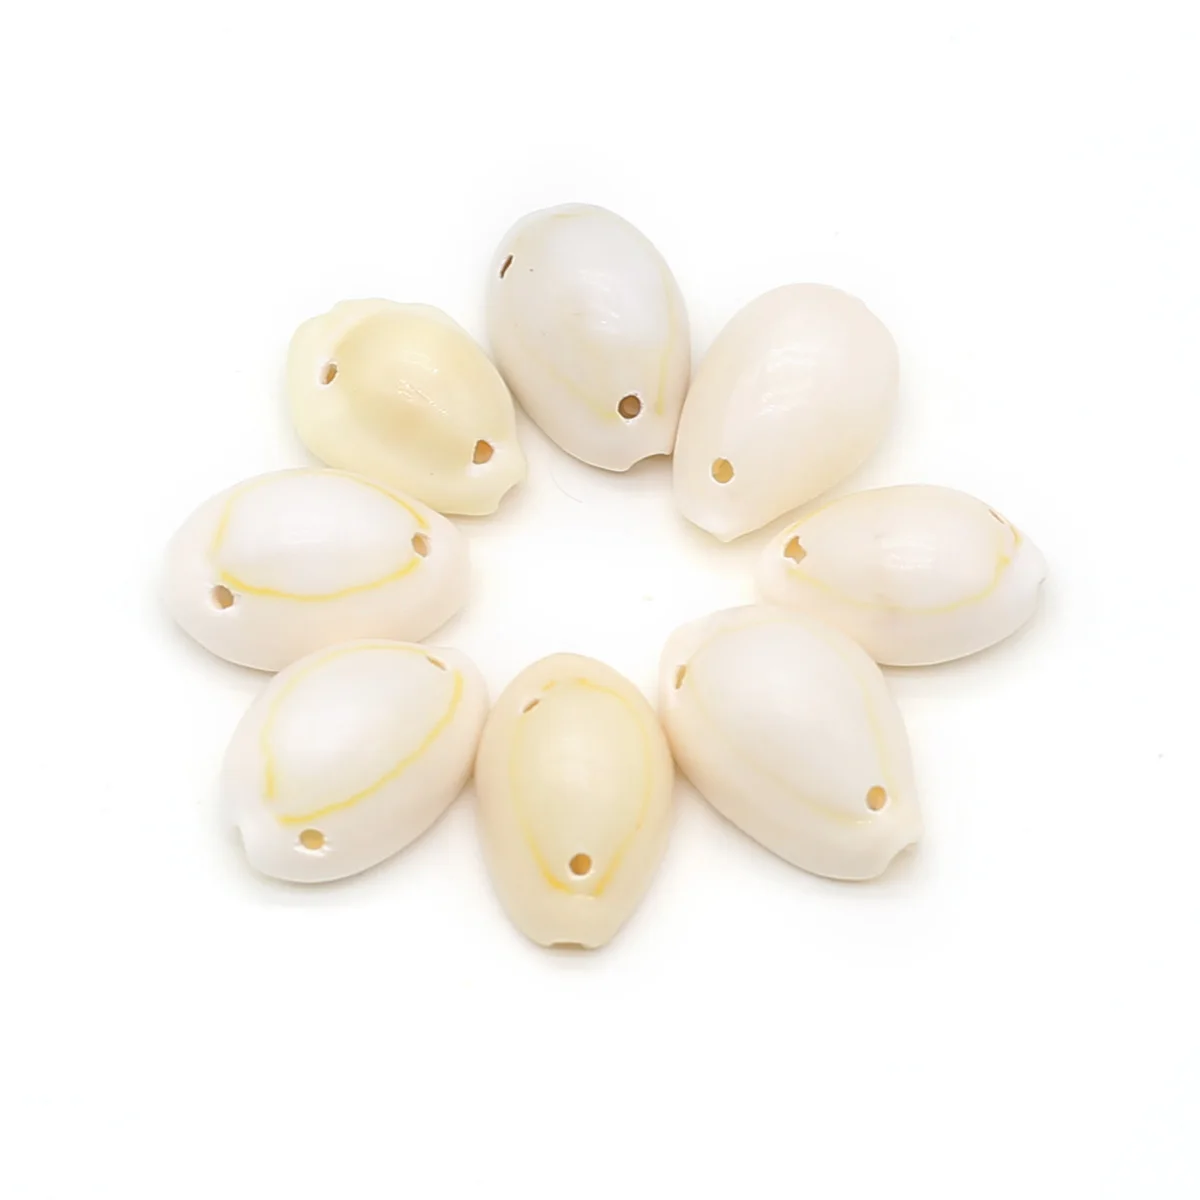 

100g/Pack Natural Sea Shell Conch Beads For DIY Home Decorations Aquarium Fish Tank Landscape Without Holes 1.6-1.8cm